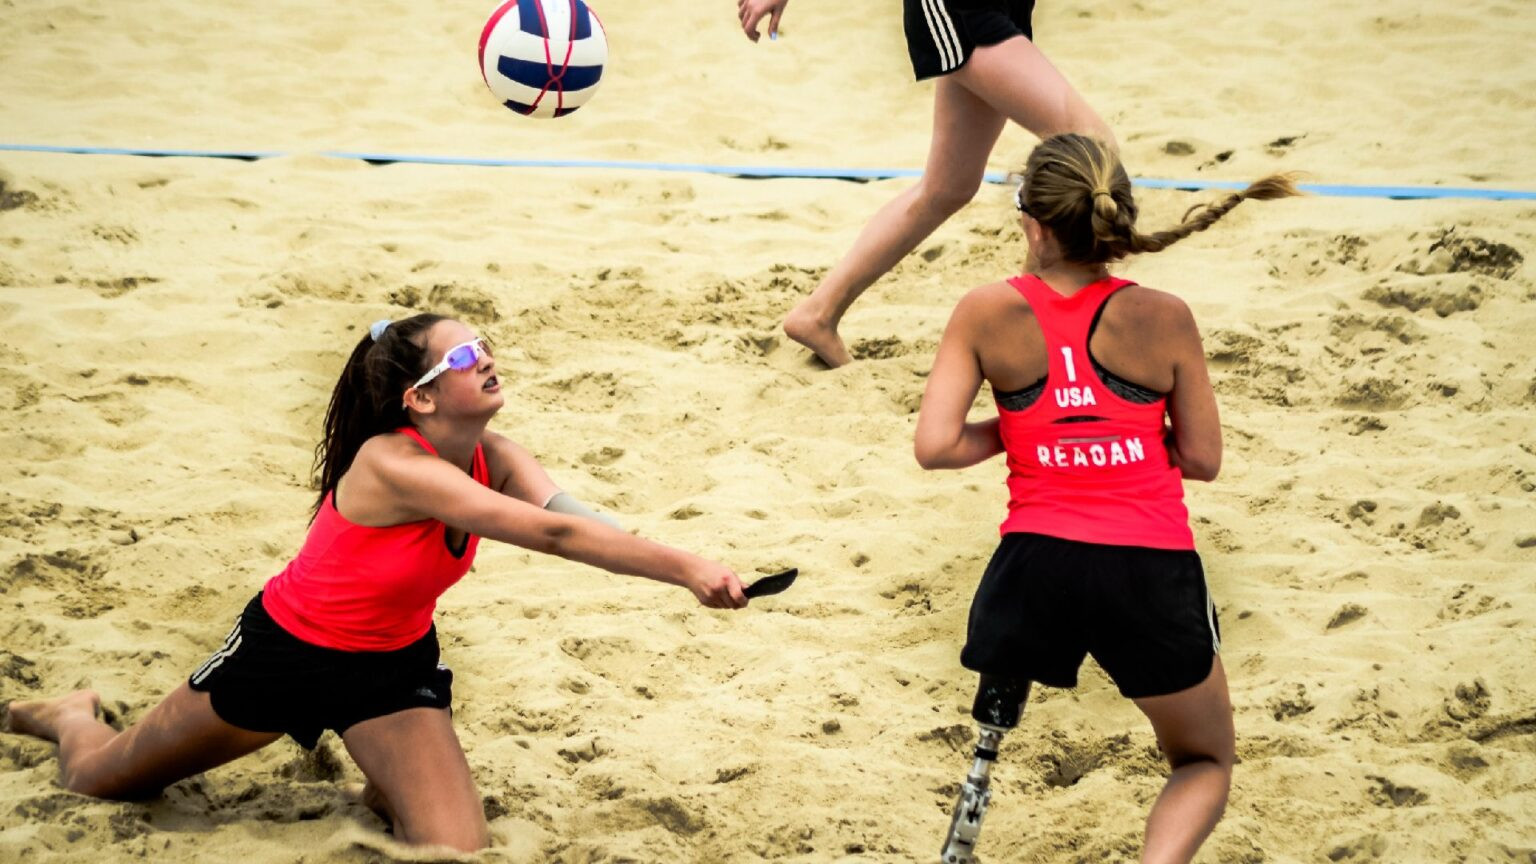 USA Volleyball beach ParaVolley programme boosted by $100,000 donation